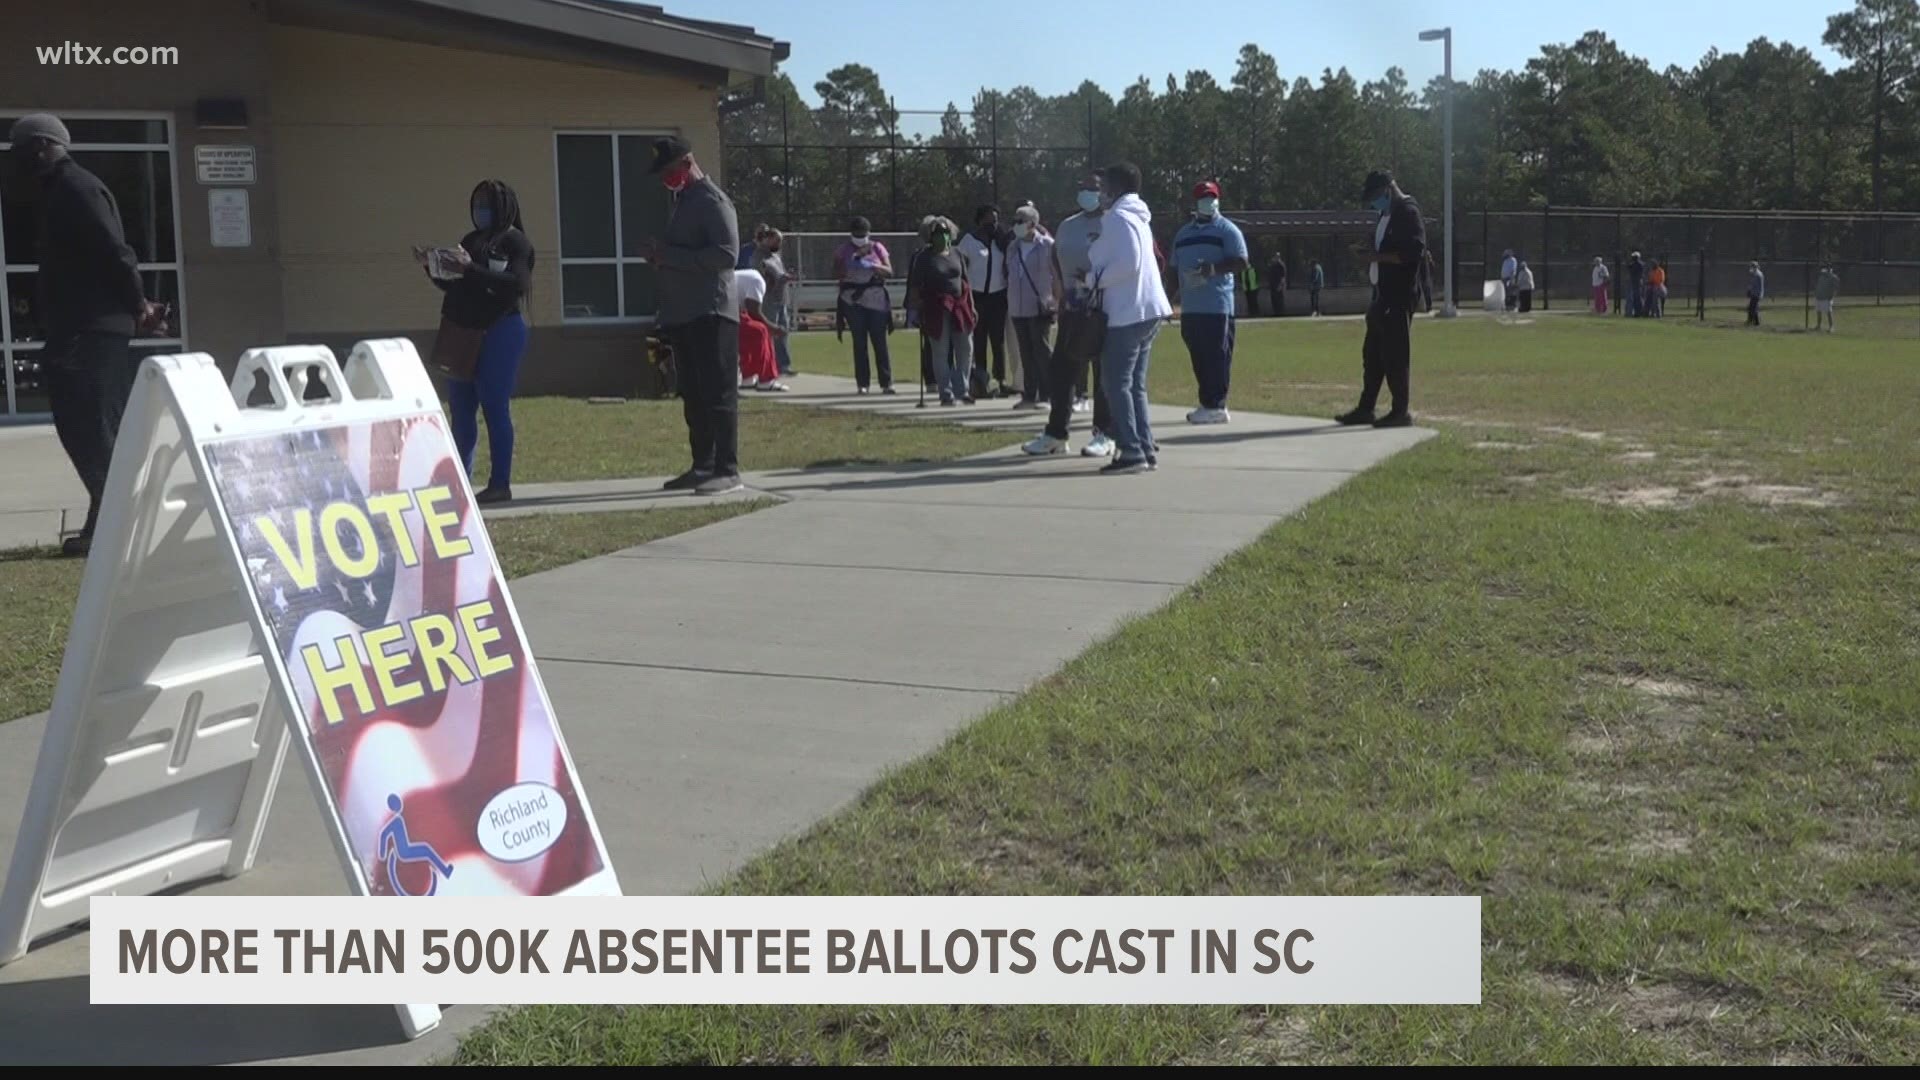 Data from the SC Election Commission shows more than 500,000 voters had returned their ballot by October 19, 2020.